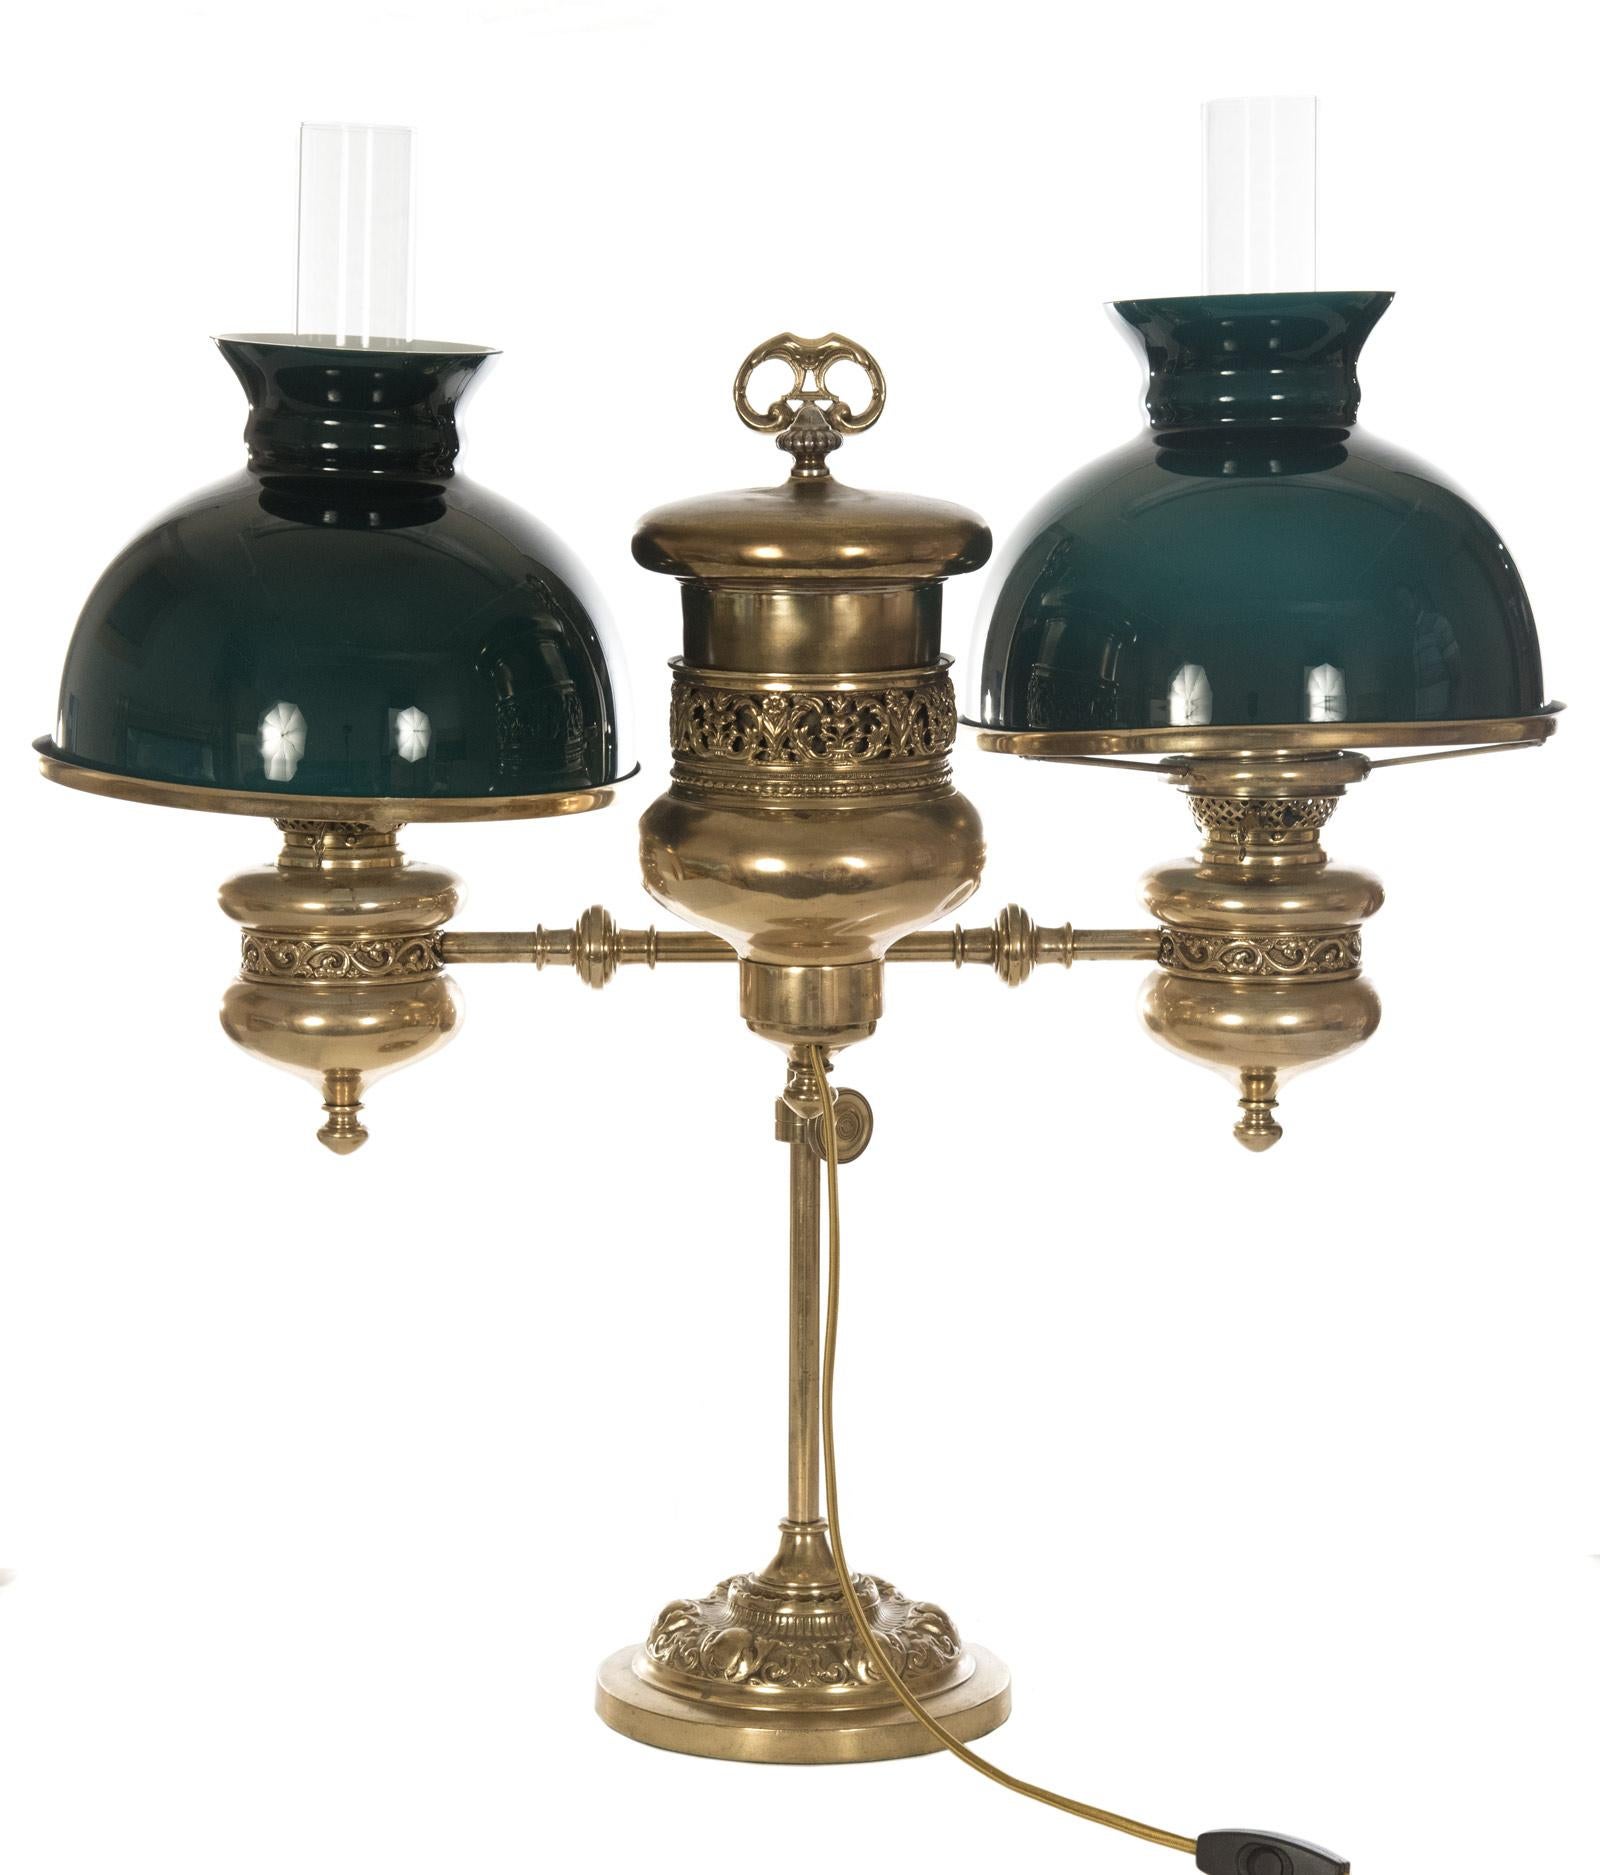 An electrified, late 19th century double student gas lamp with green case glass shades raised on finely chased and pierced brass fuel reservoirs, the arms affixed to an adjustable central stem, all raised on a domed base. Marked on light knobs 